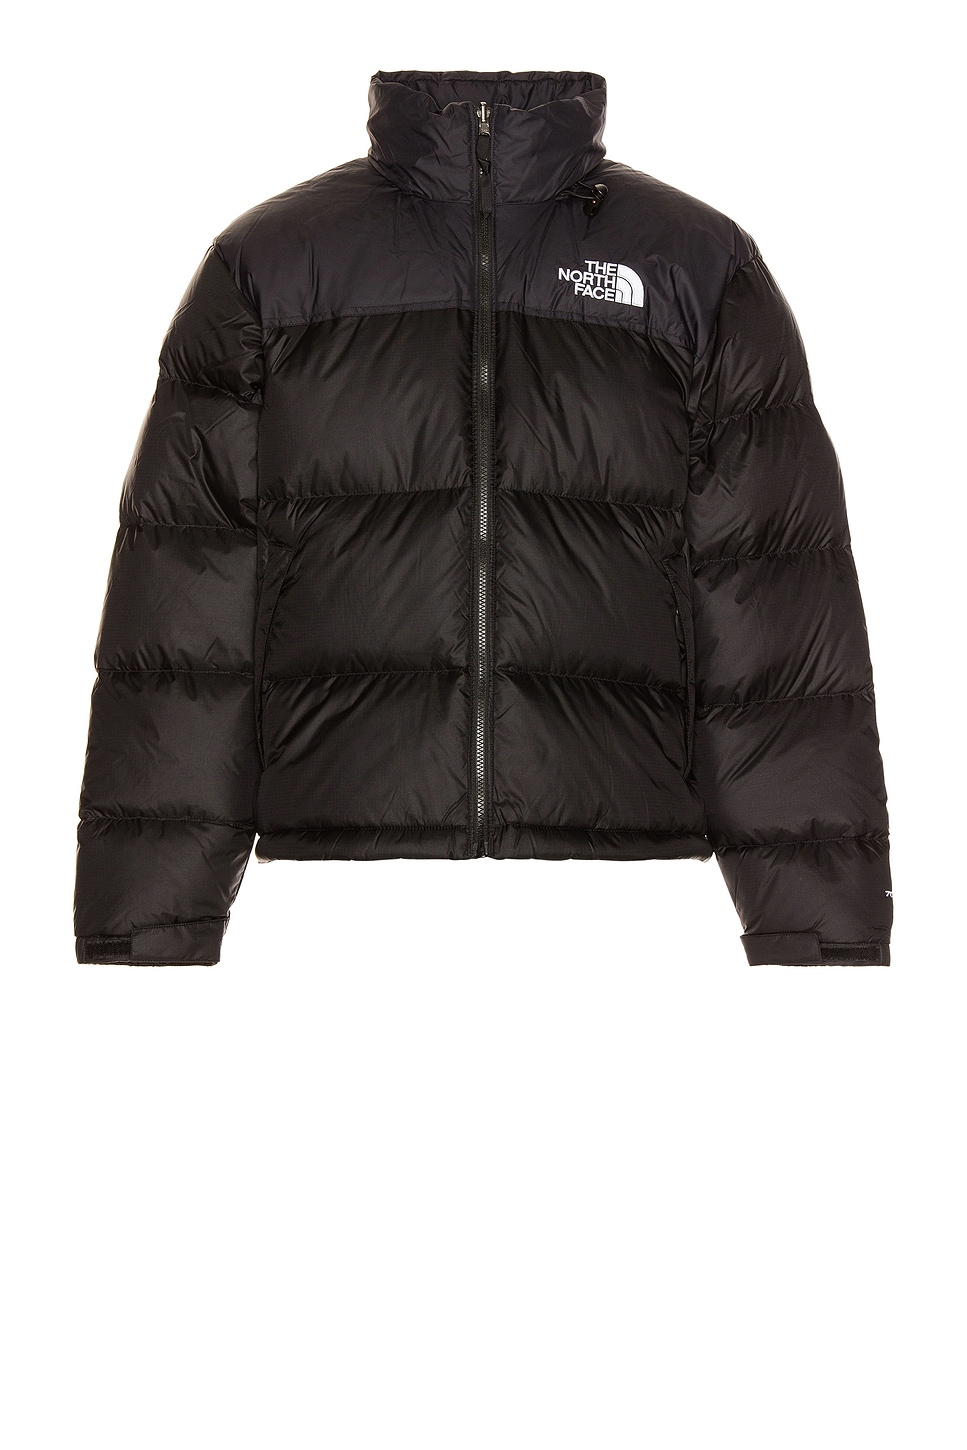 The North Face 1996 Retro Nuptse Jacket in Recycled TNF Black | FWRD